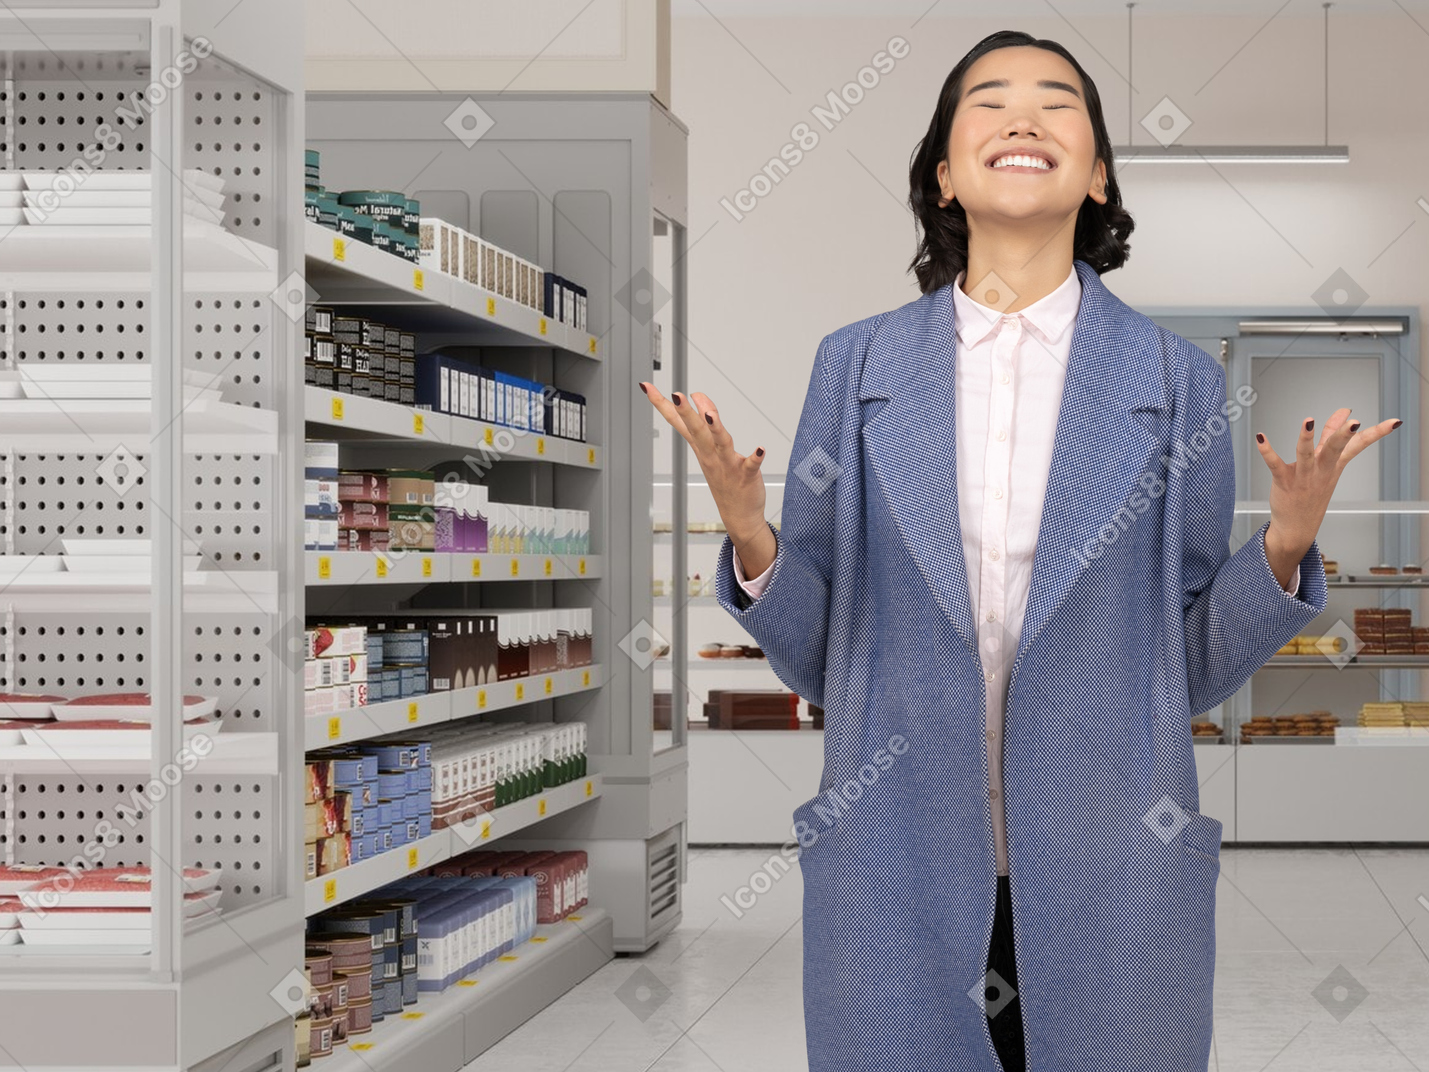 A happy woman standing in a supermarket